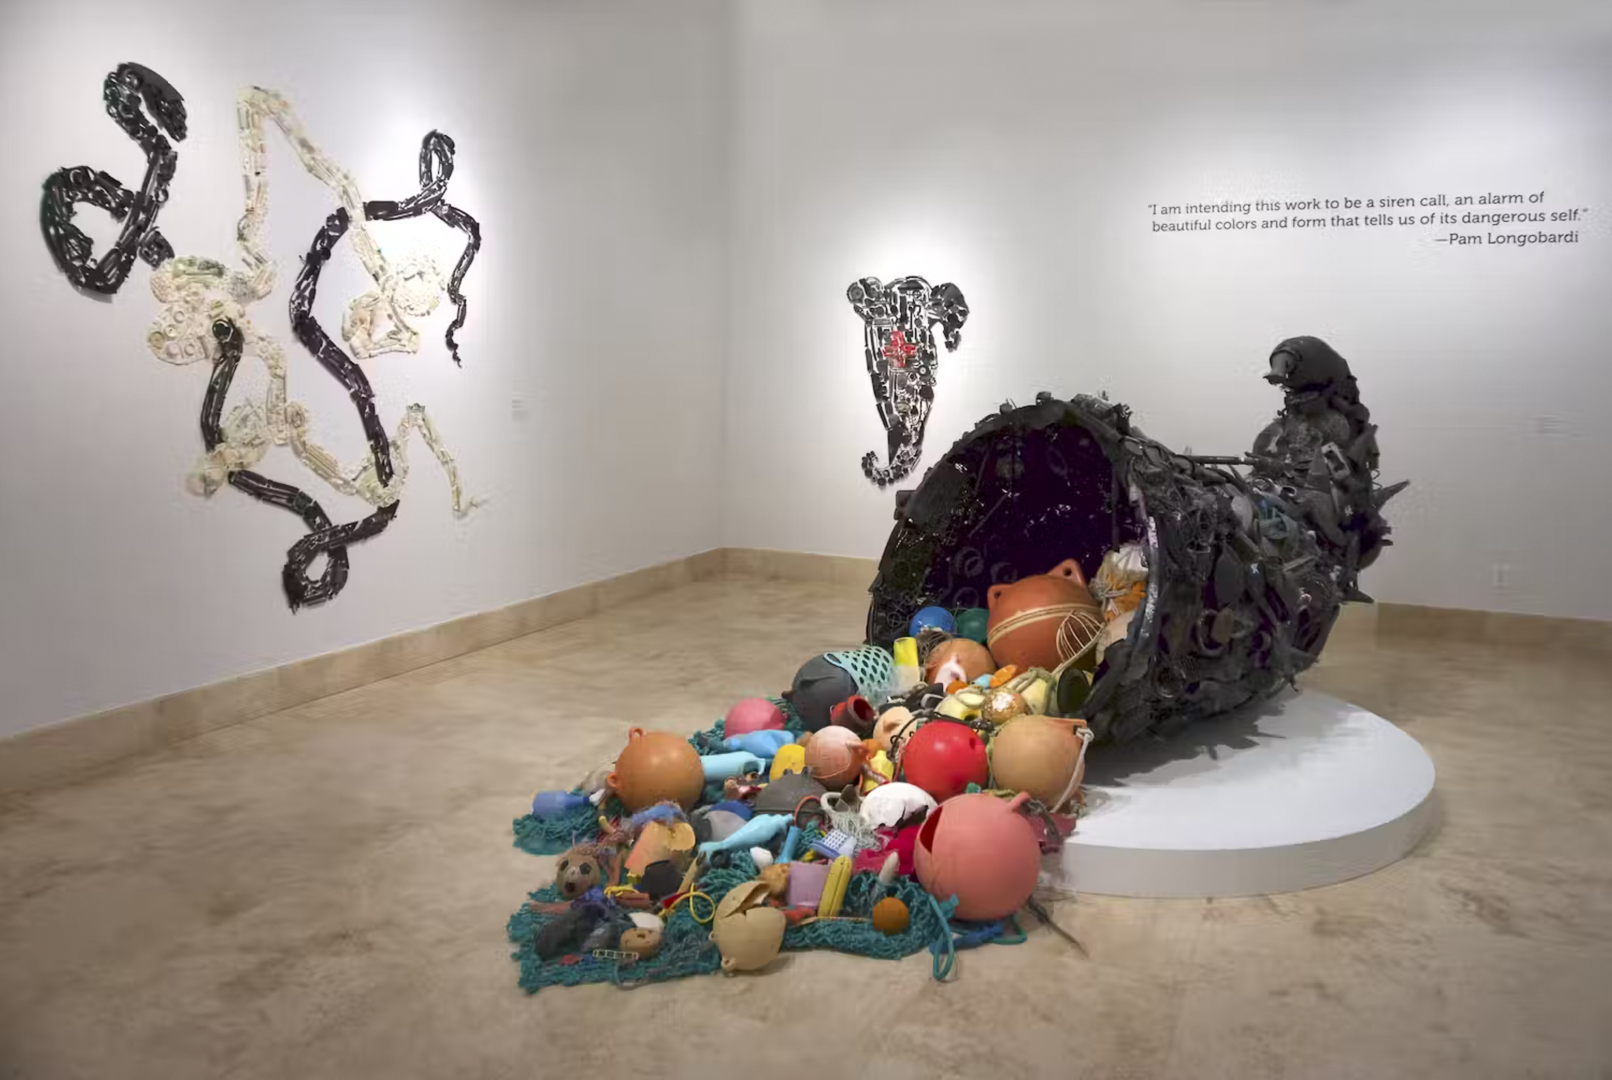 ‘Bounty Pilfered’ (center), ‘Newer Laocoön’ (left) and ‘Threnody’ (right). All made of ocean plastic from the Atlantic, Pacific and Gulf of Mexico, installed at the Baker Museum in Naples, Fla., 2022 (by Pam Longobardi, CC BY-ND via the Converstion).